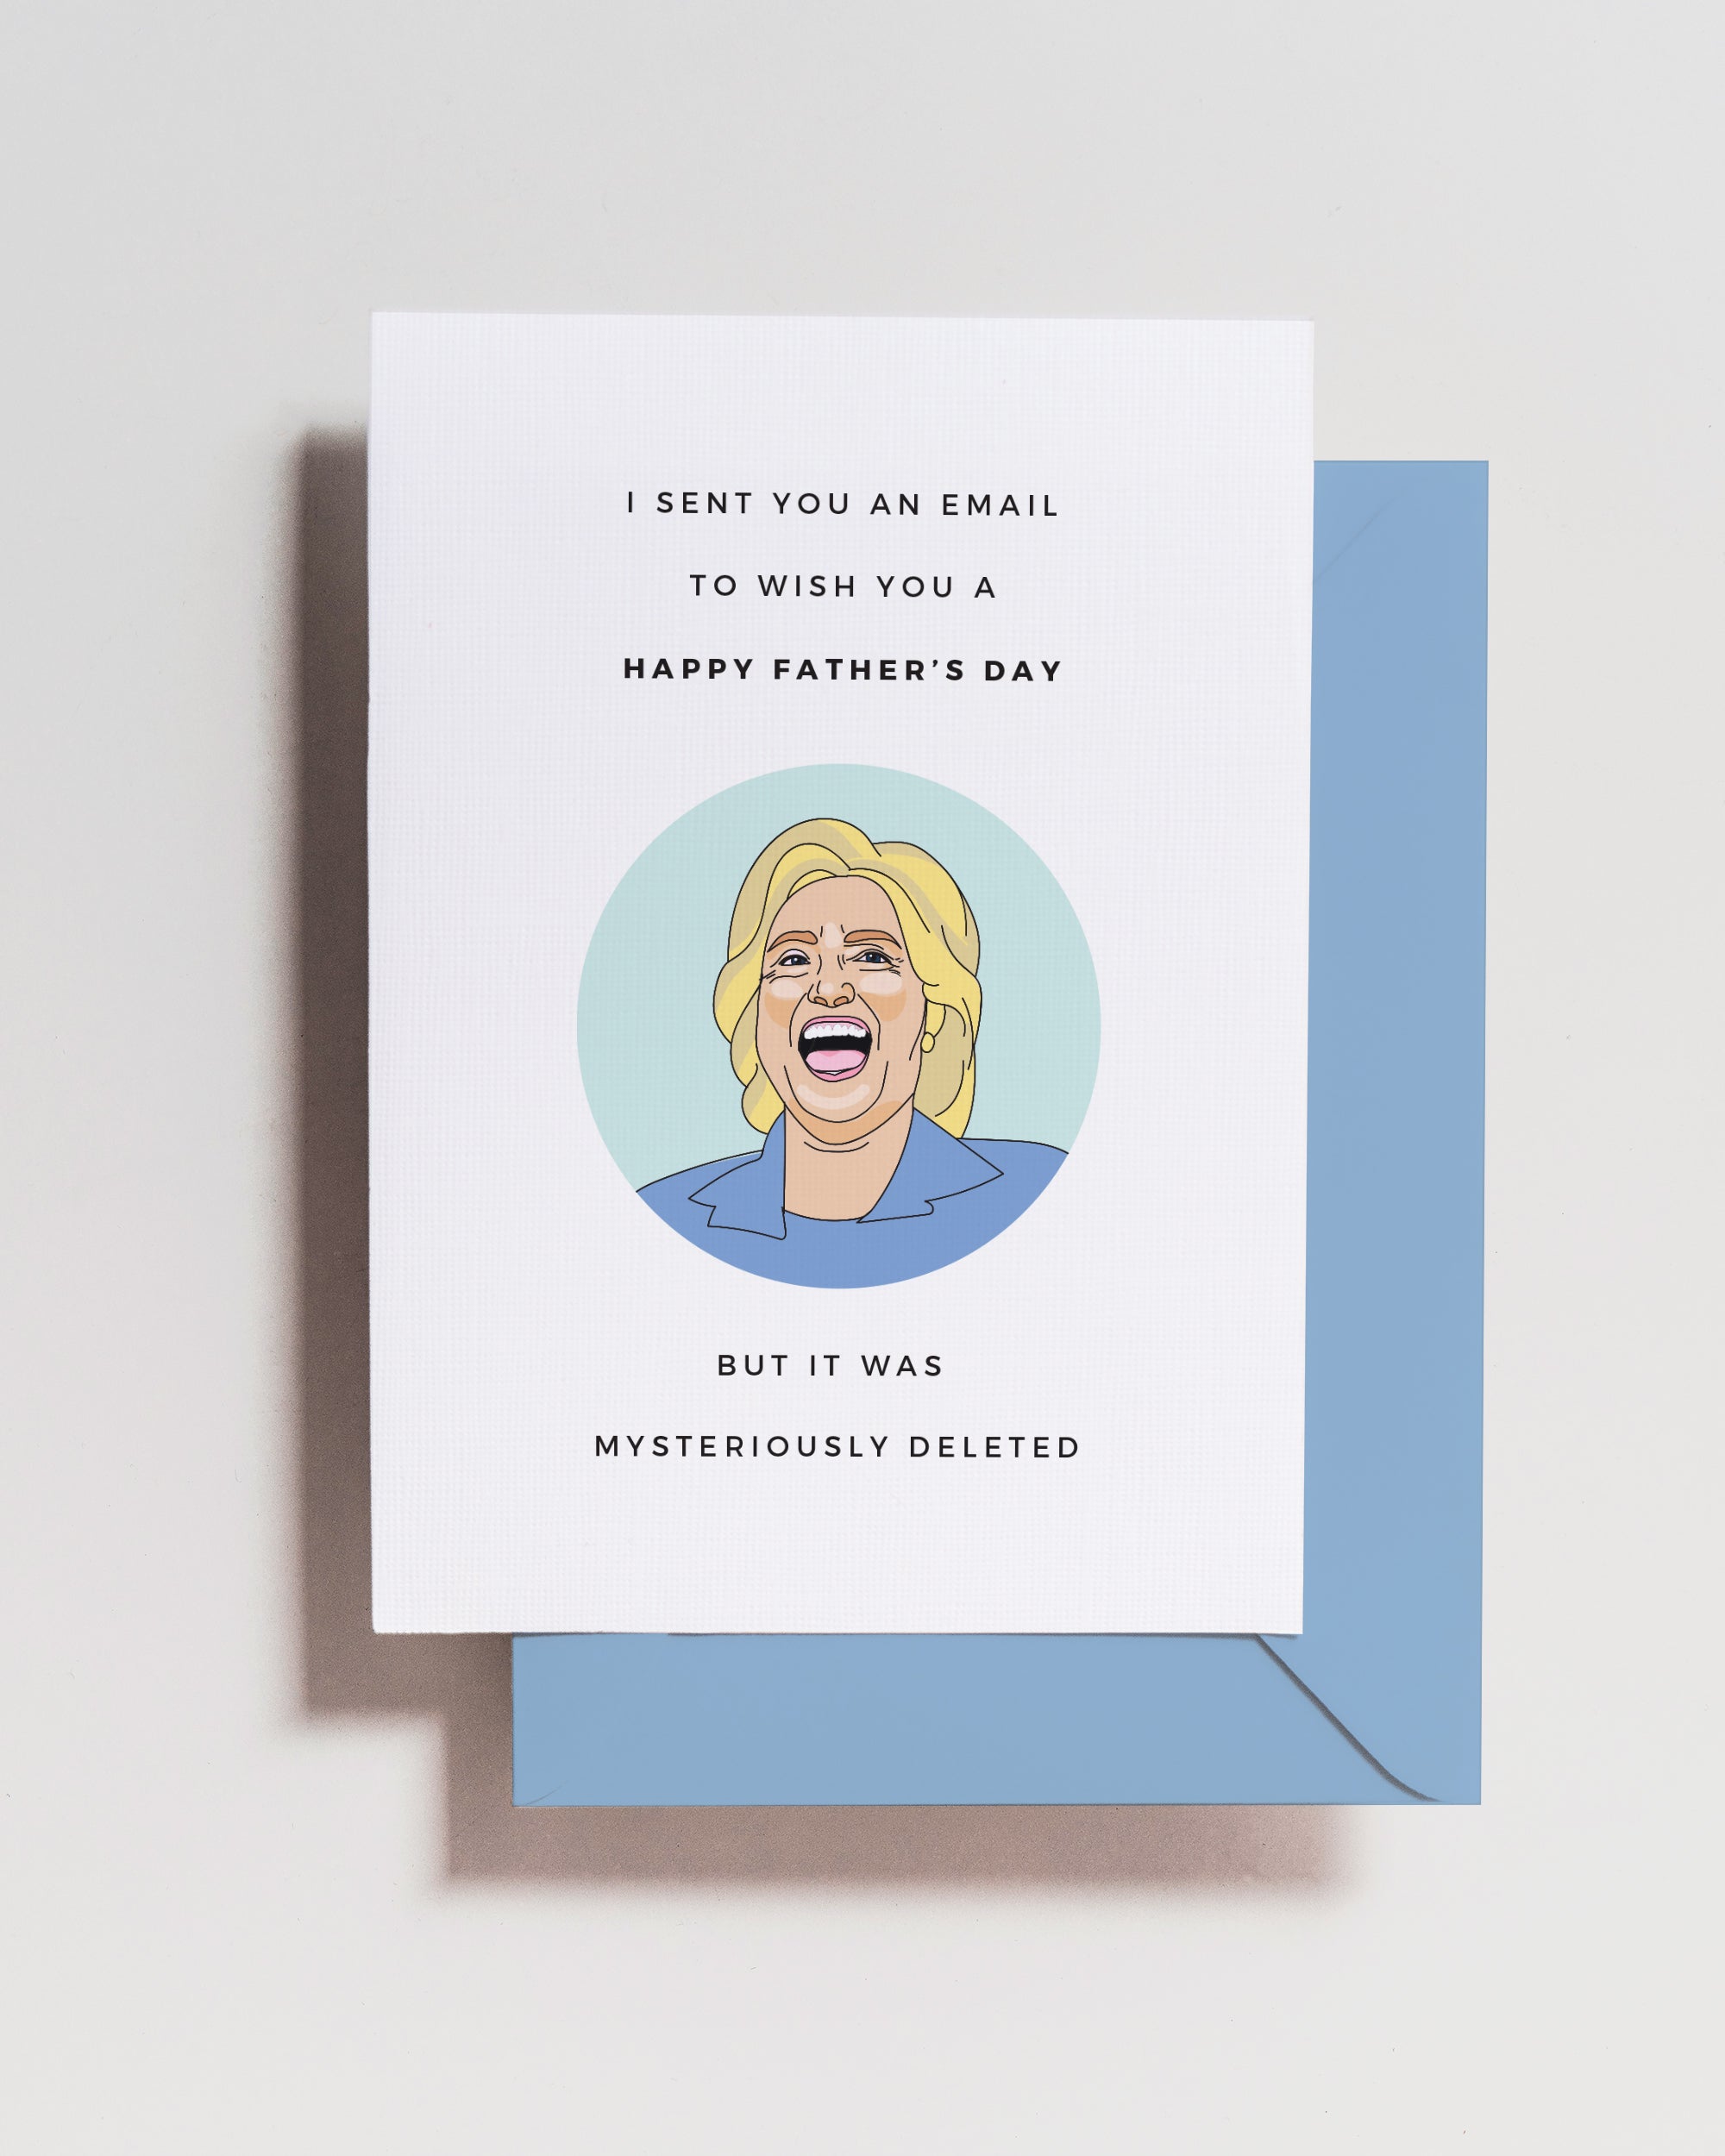 Hilary Clinton Father's Day Card